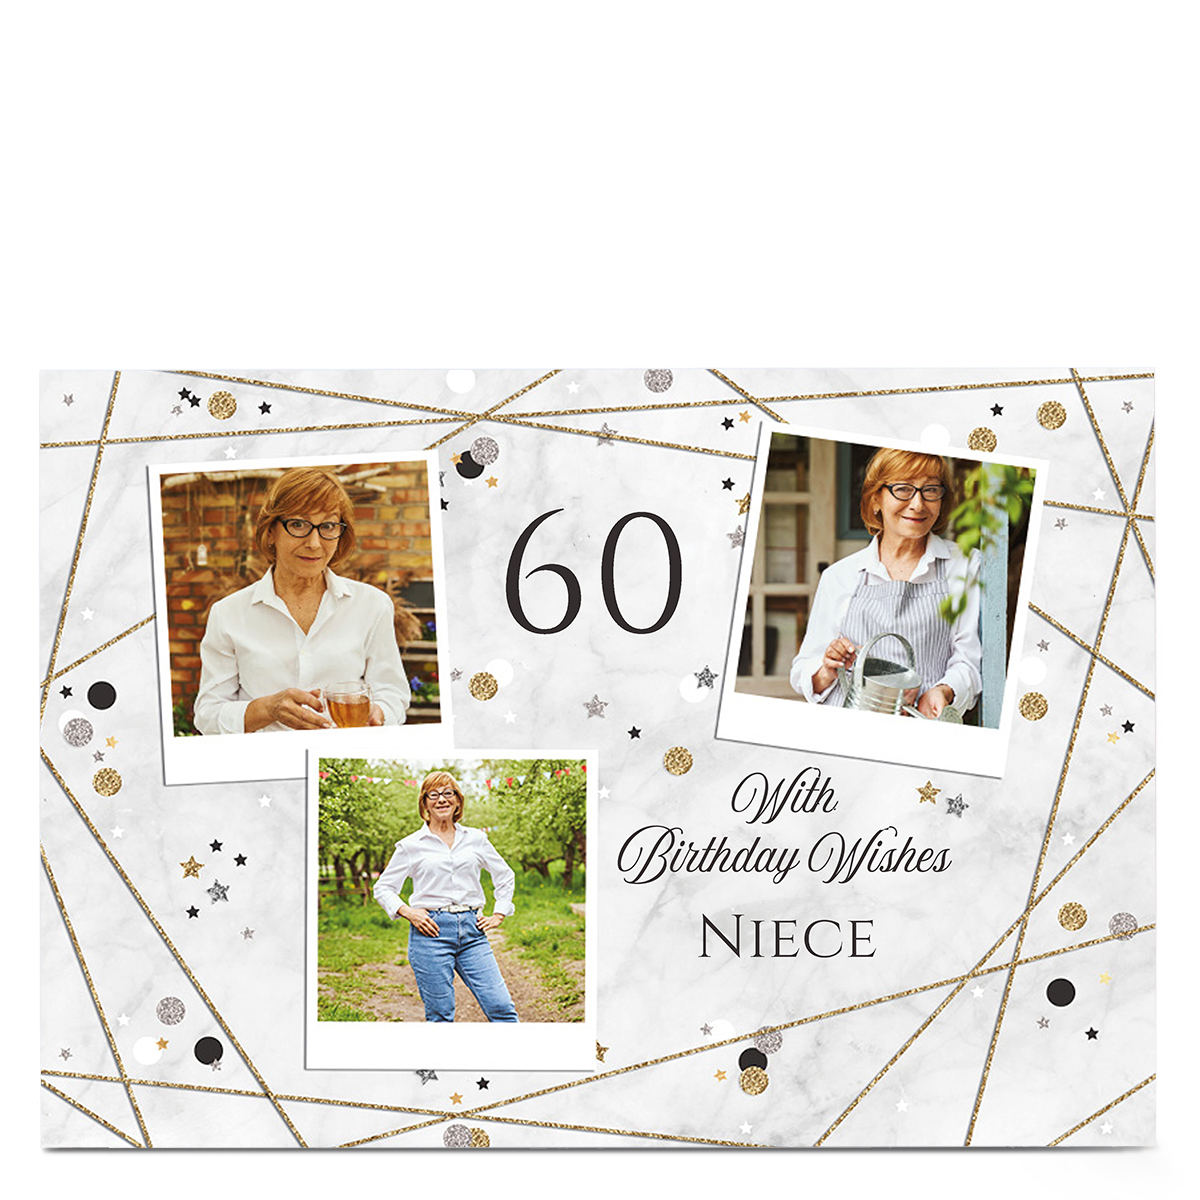 Photo Birthday Card - With Birthday Wishes, Editable Age